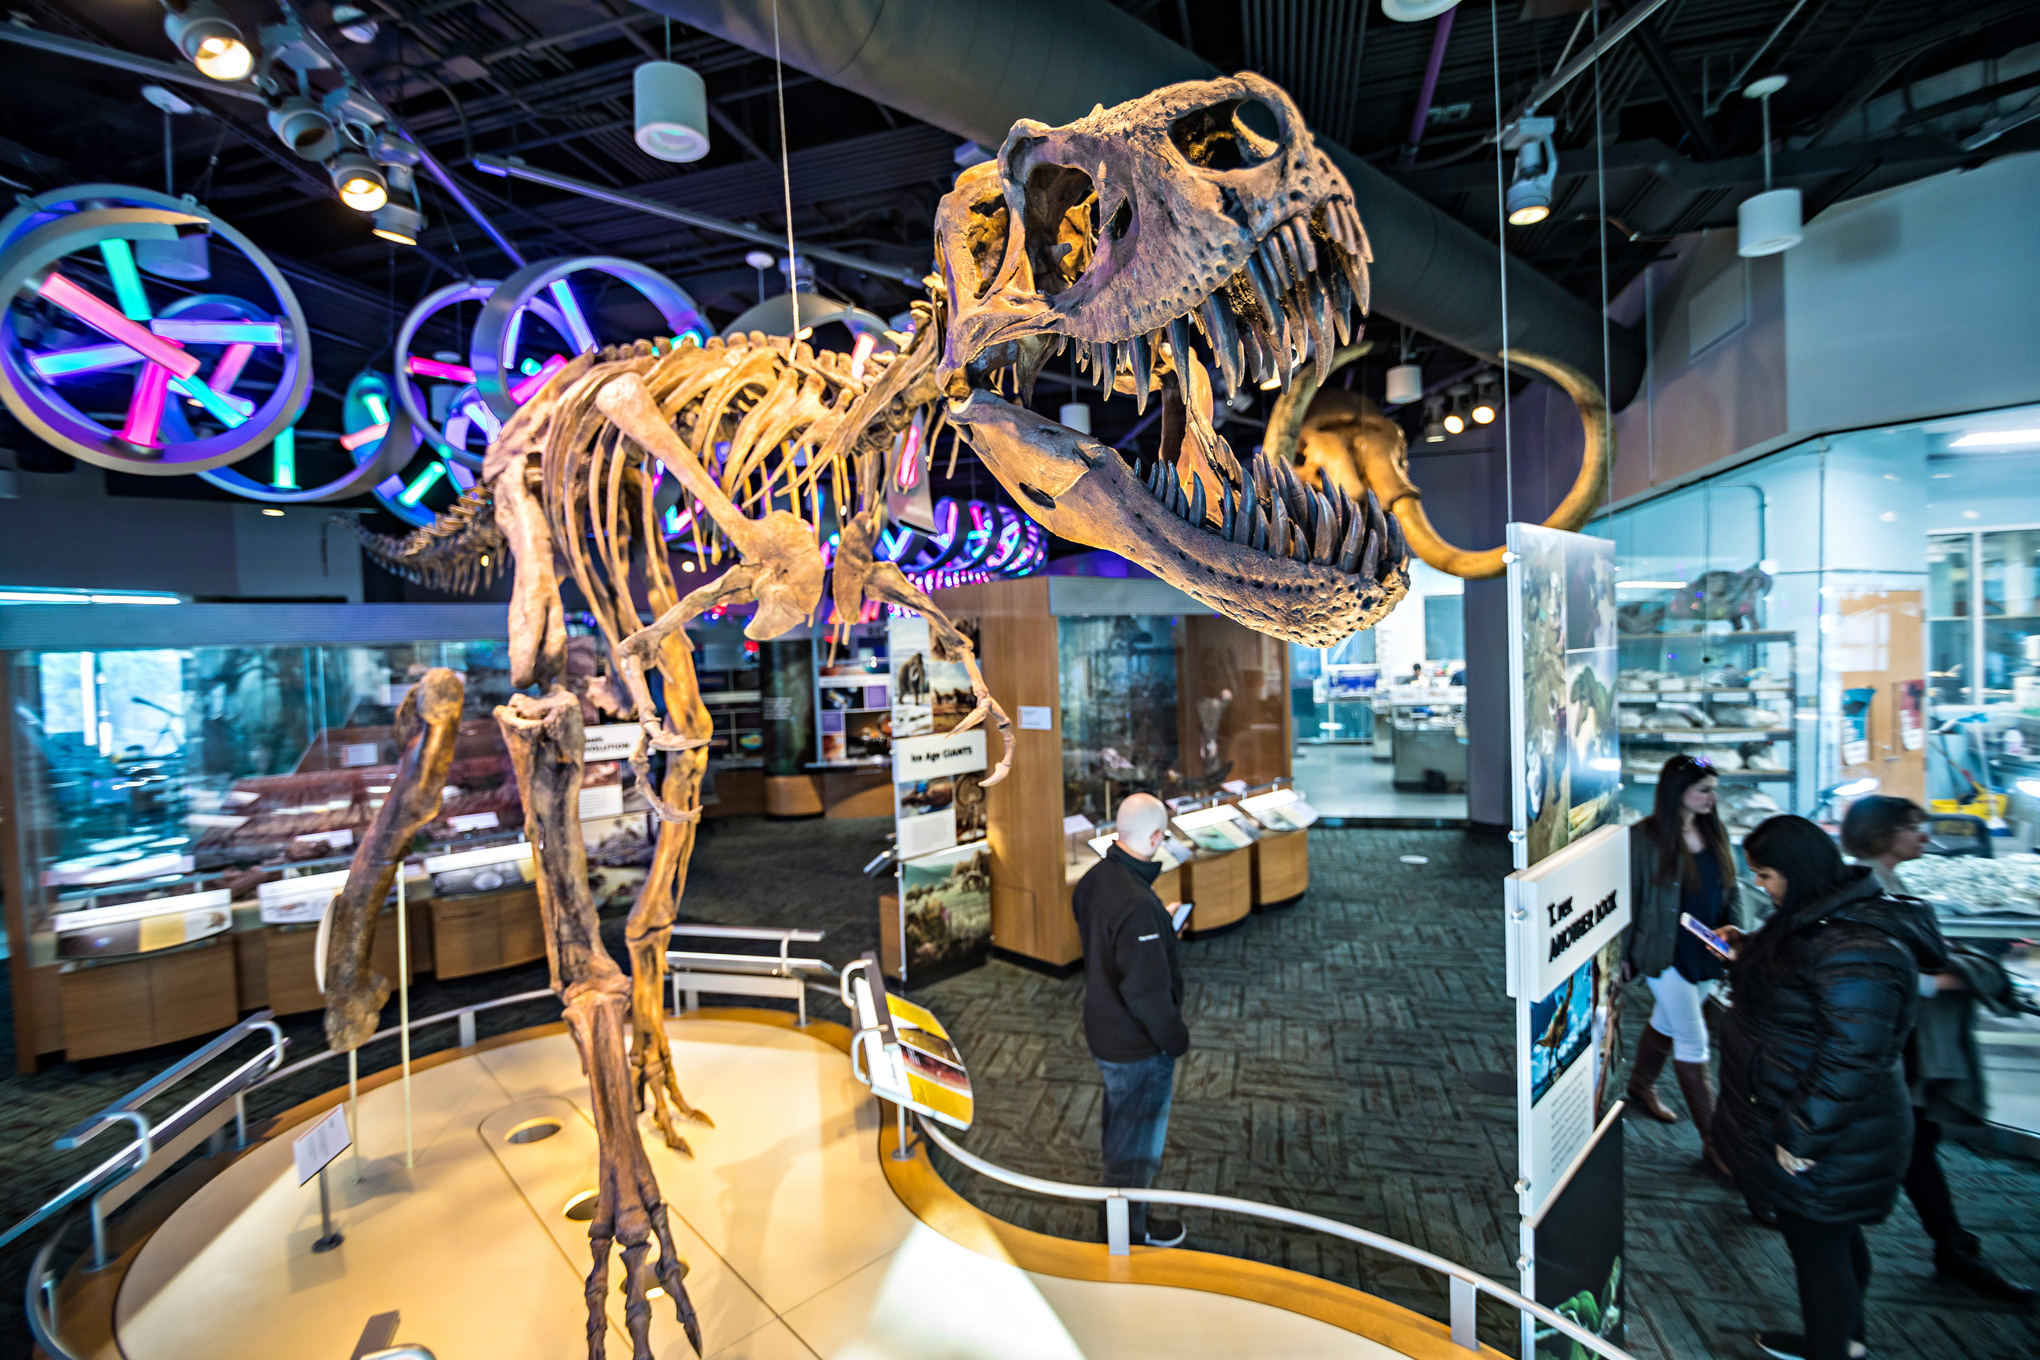 A T. rex fossil keeps watch at the North Carolina Museum of Natural Sciences.